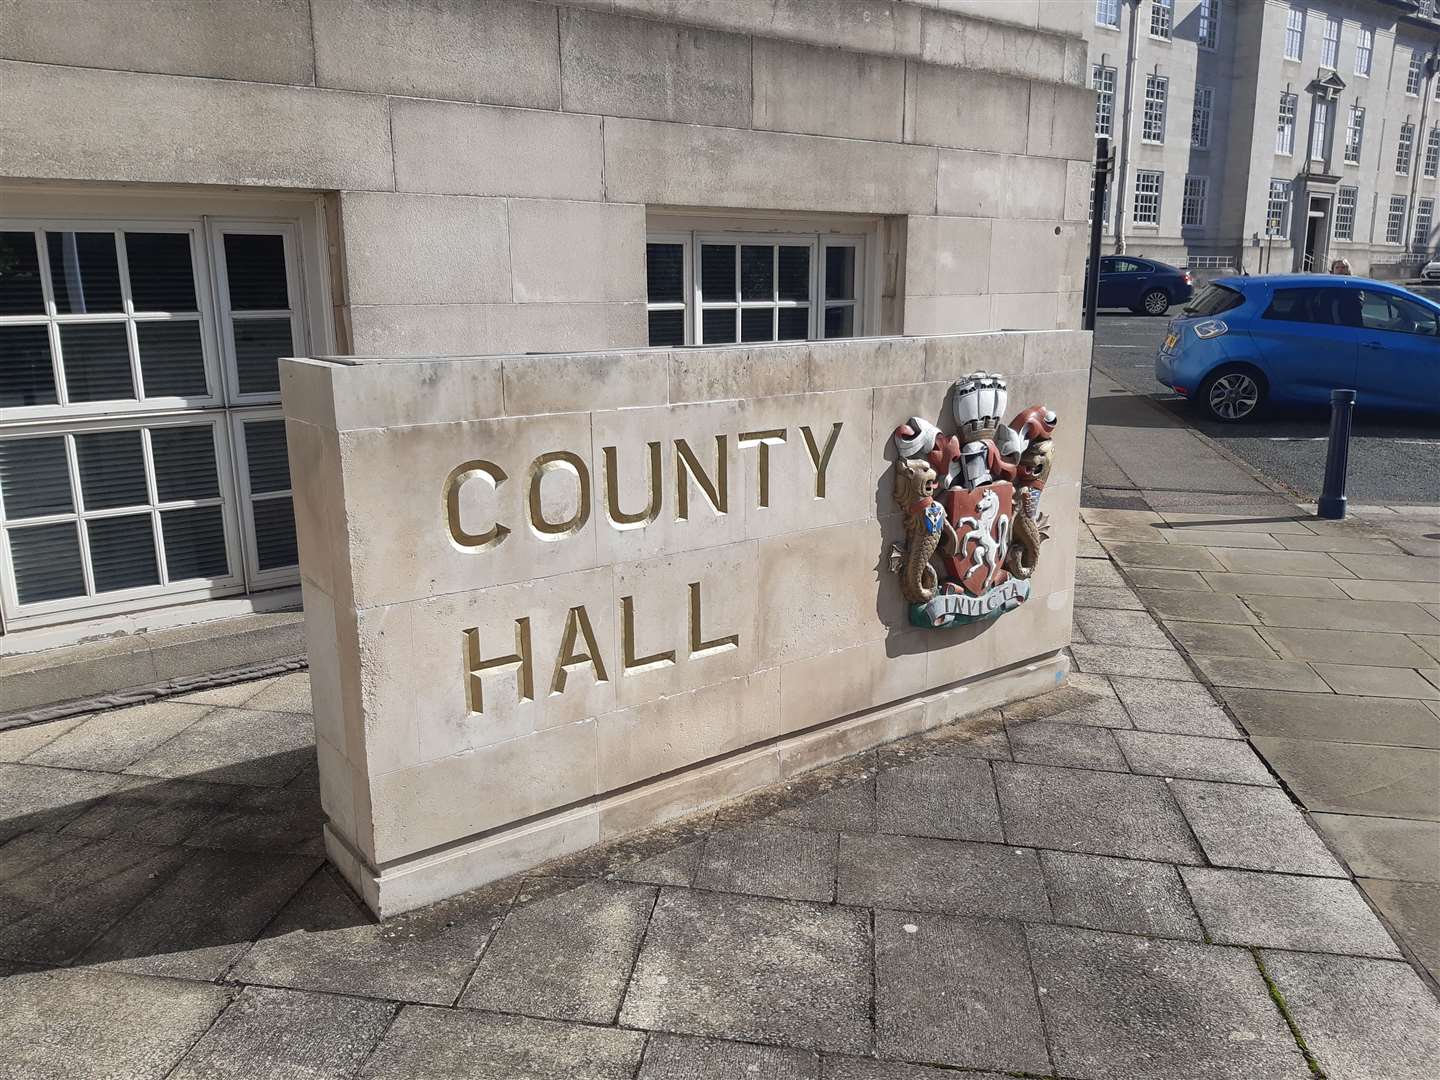 The inquest was heard at County Hall in Maidstone